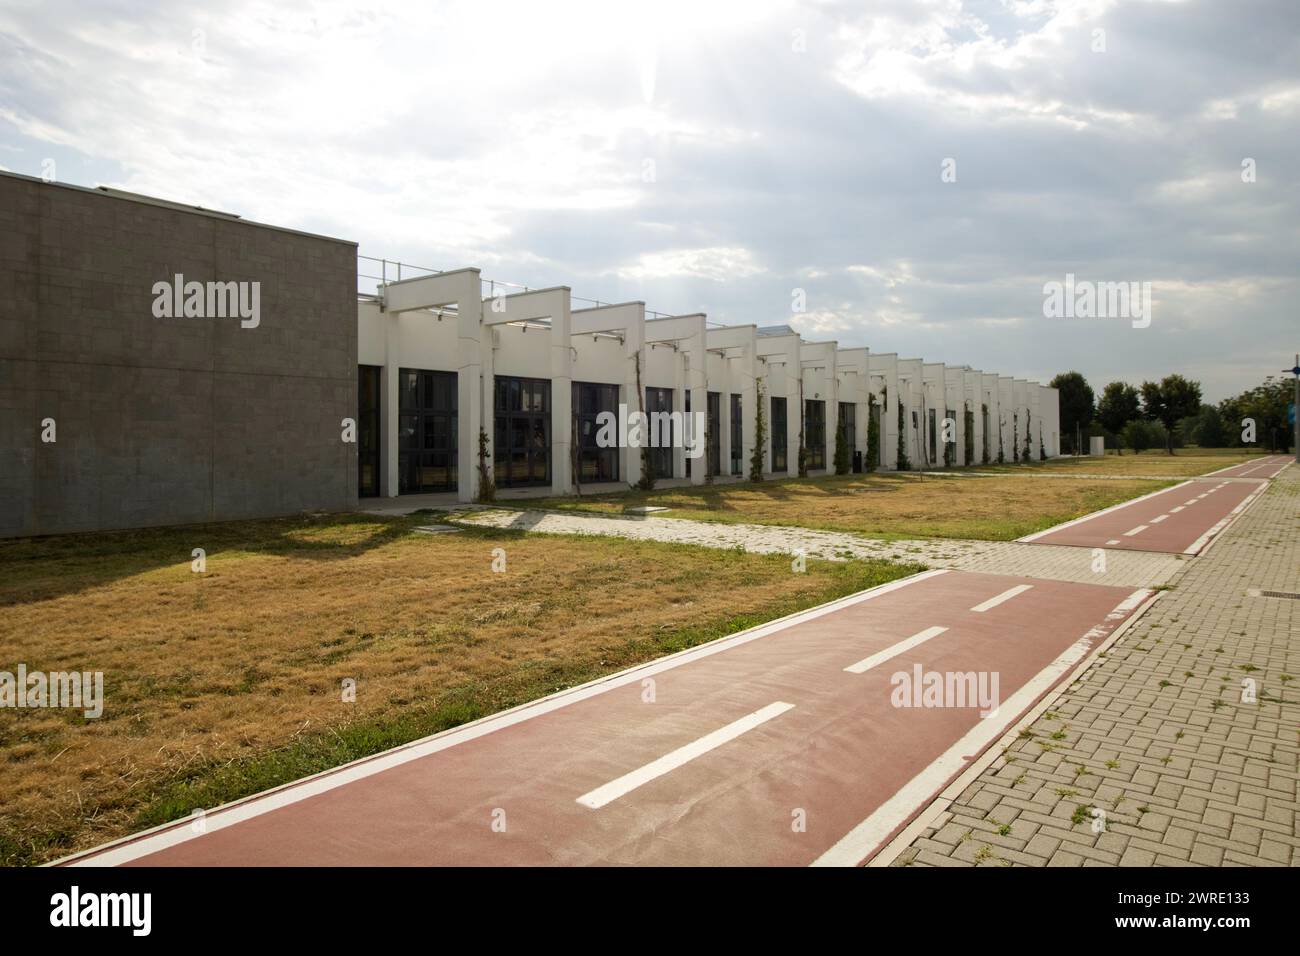 exterior building of Parma university campus with bicycle lane Stock Photo